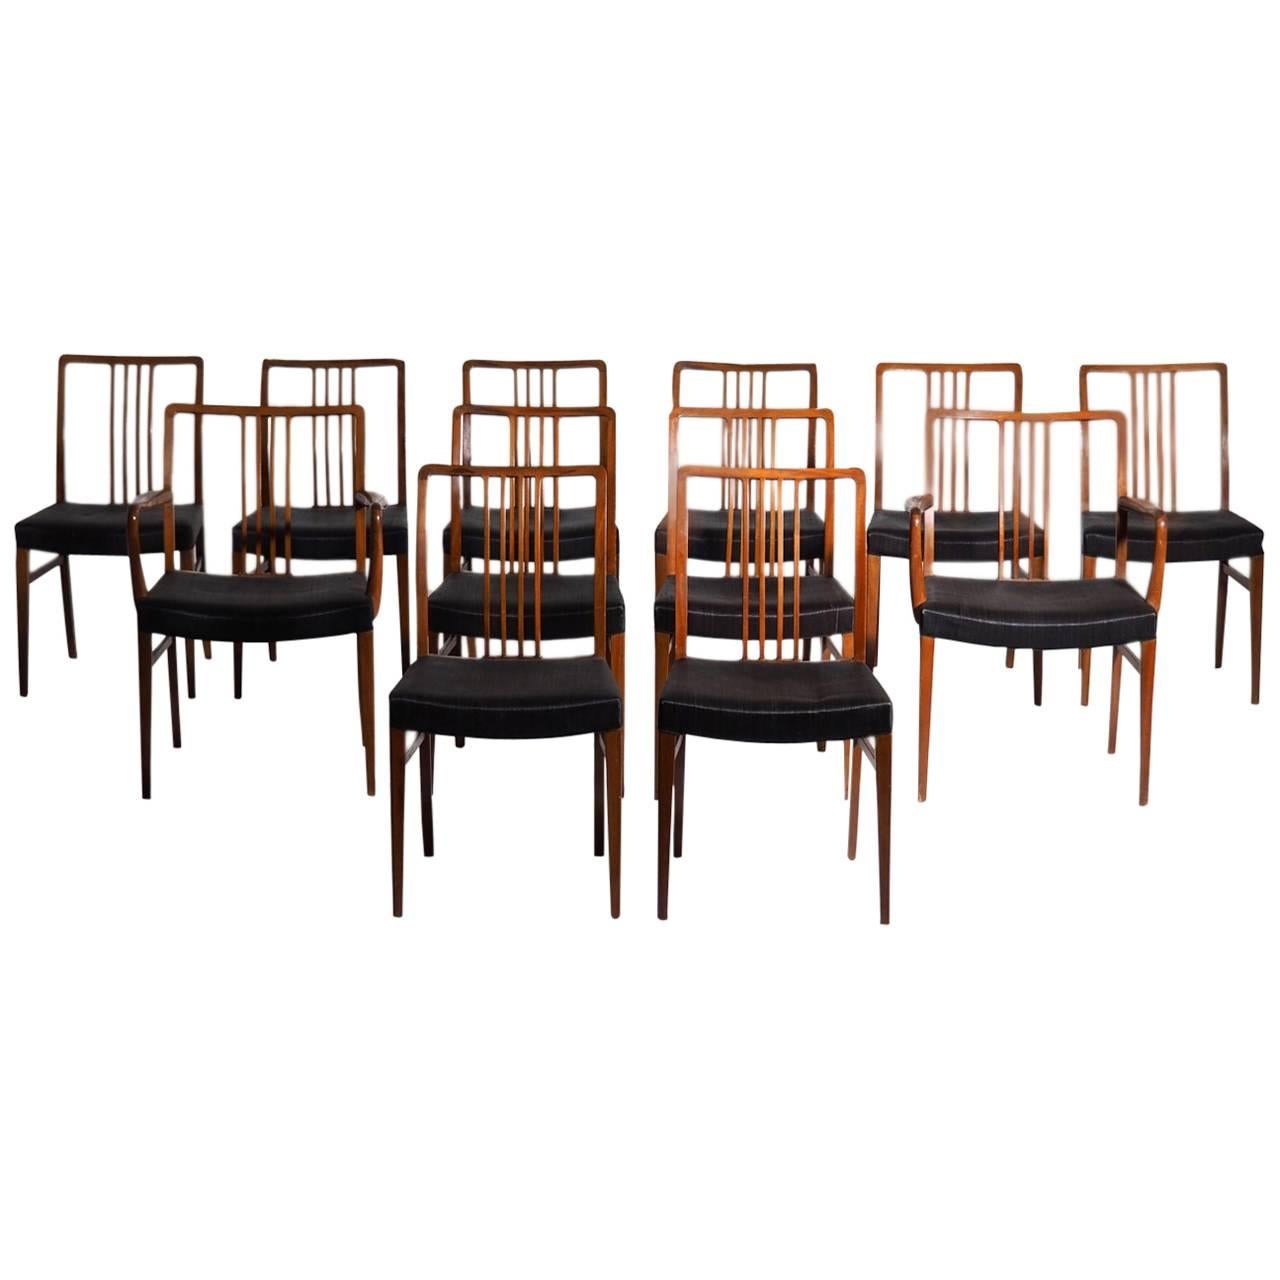 Twelve Dining Chairs in Mahogany with Black Horsehair Seats, circa 1950